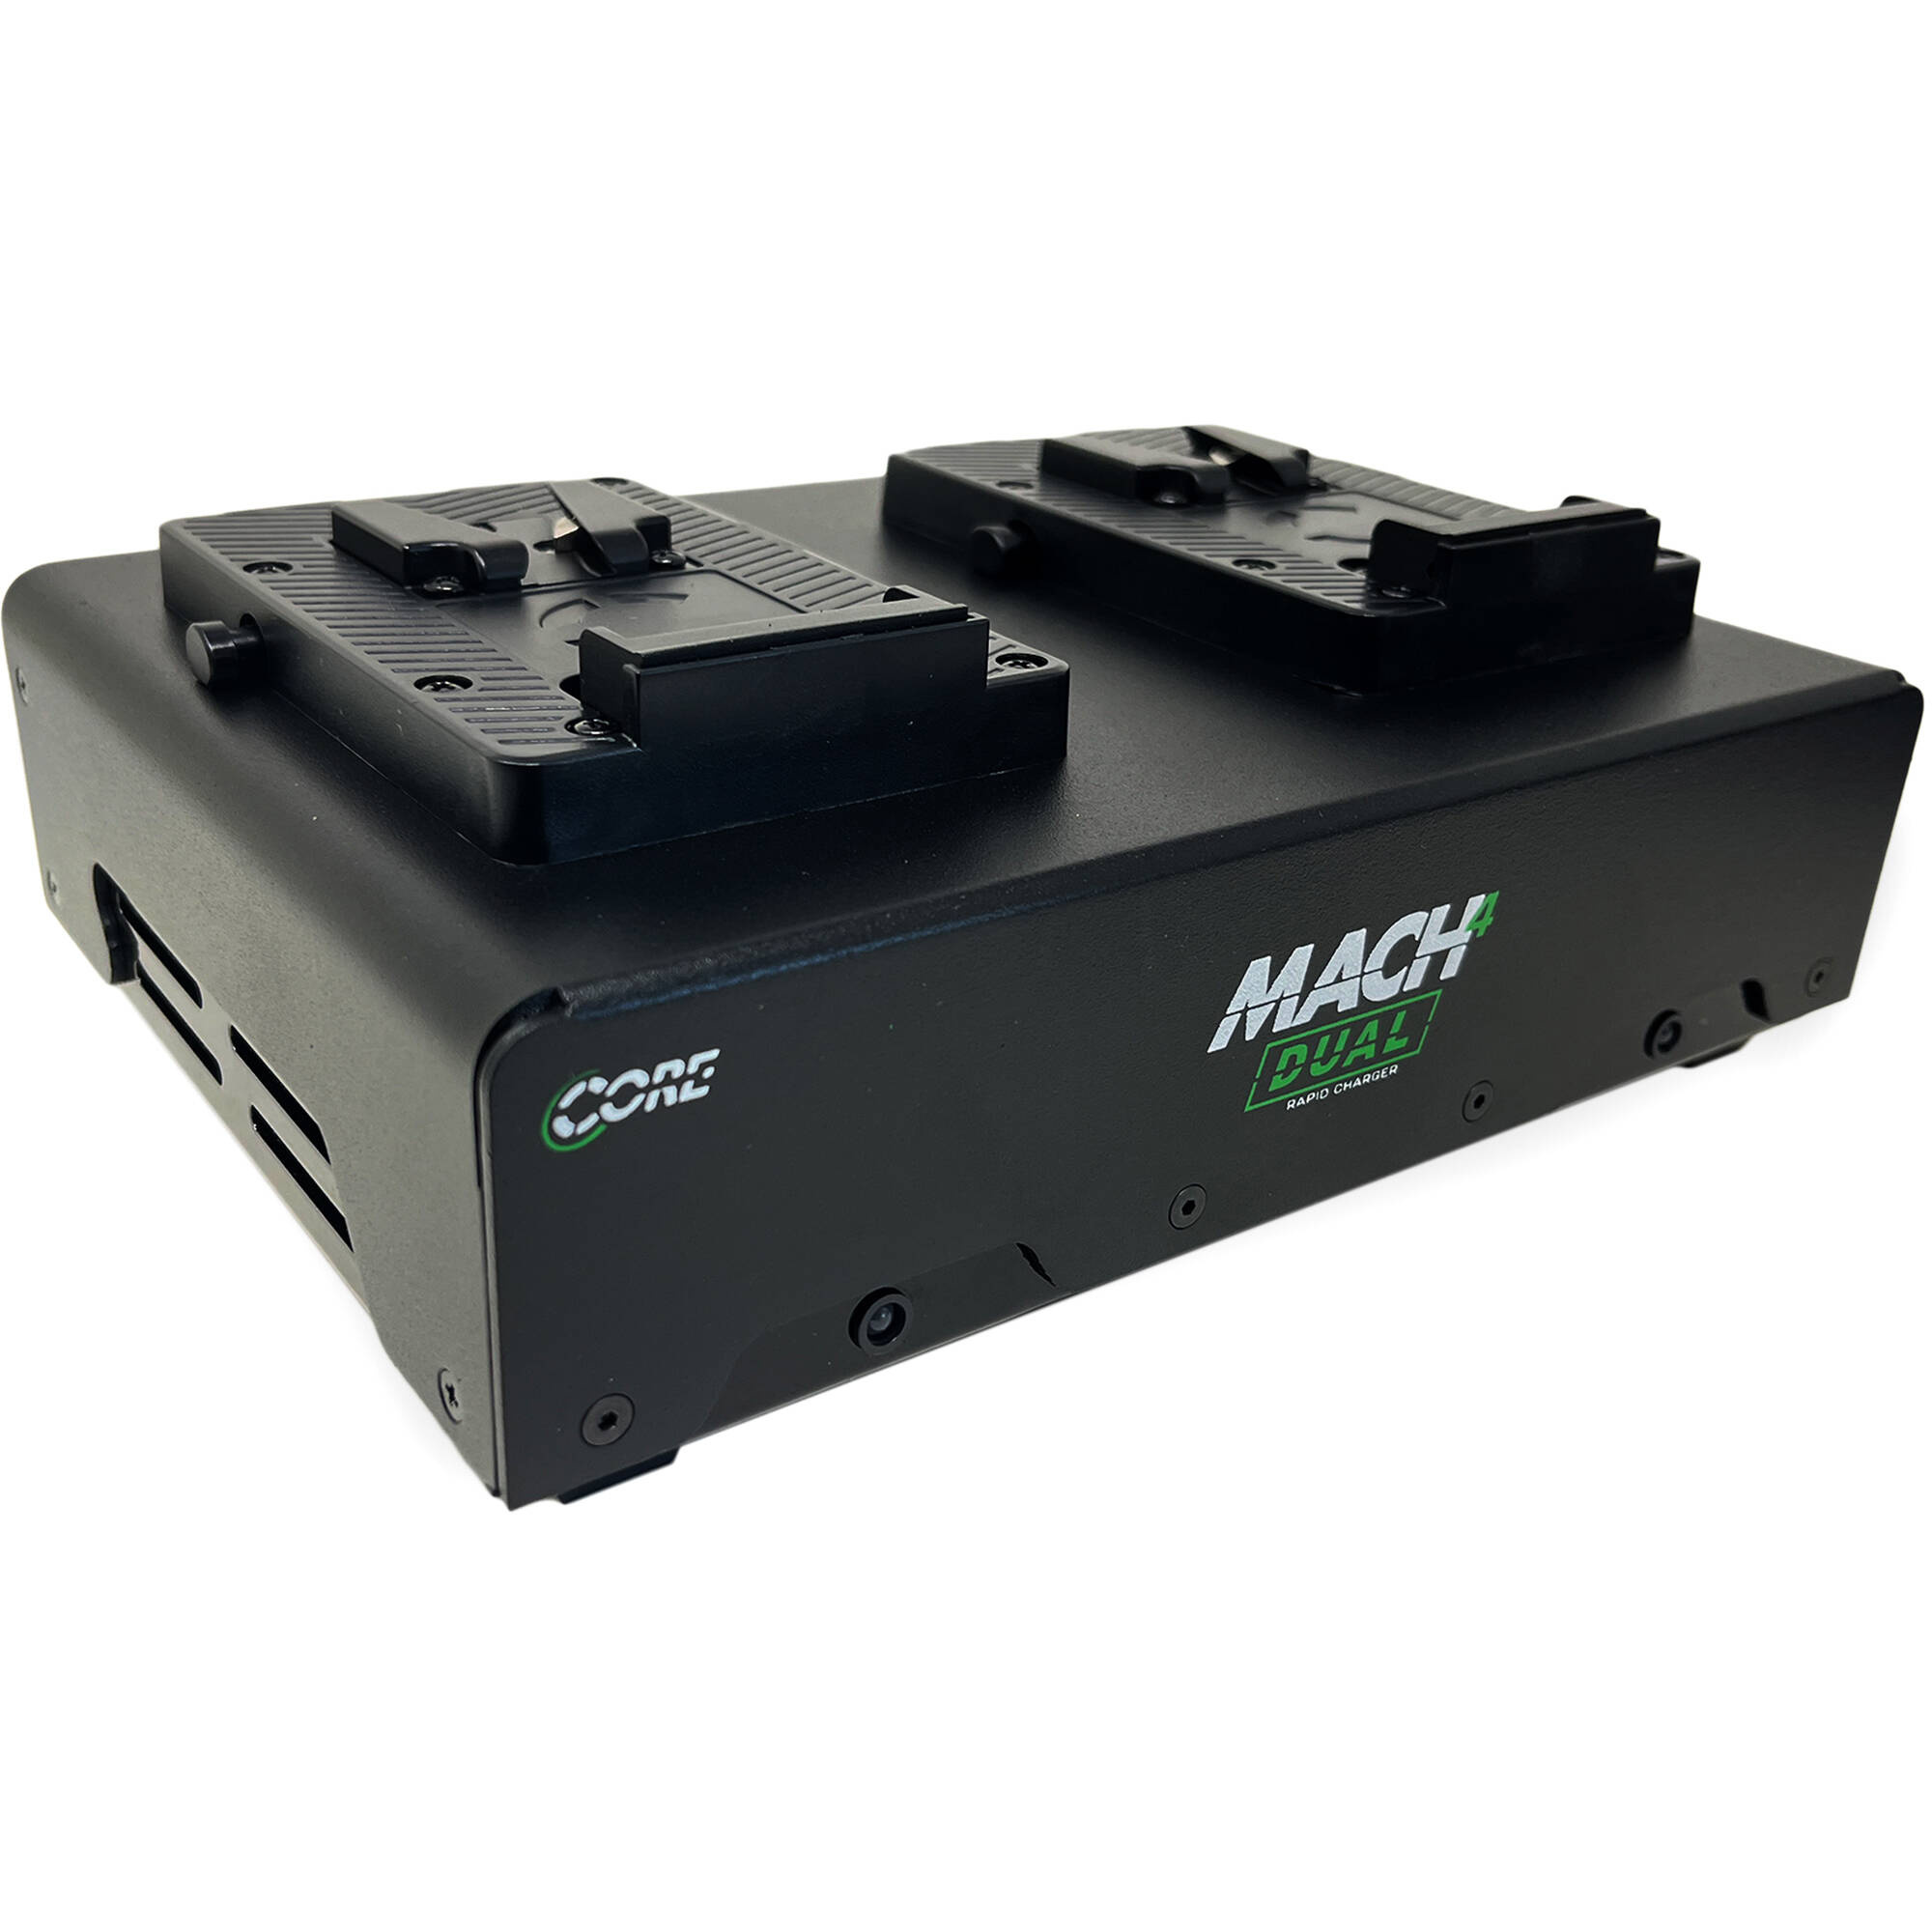 Core SWX Mach4 Dual Charger (V-Mount)